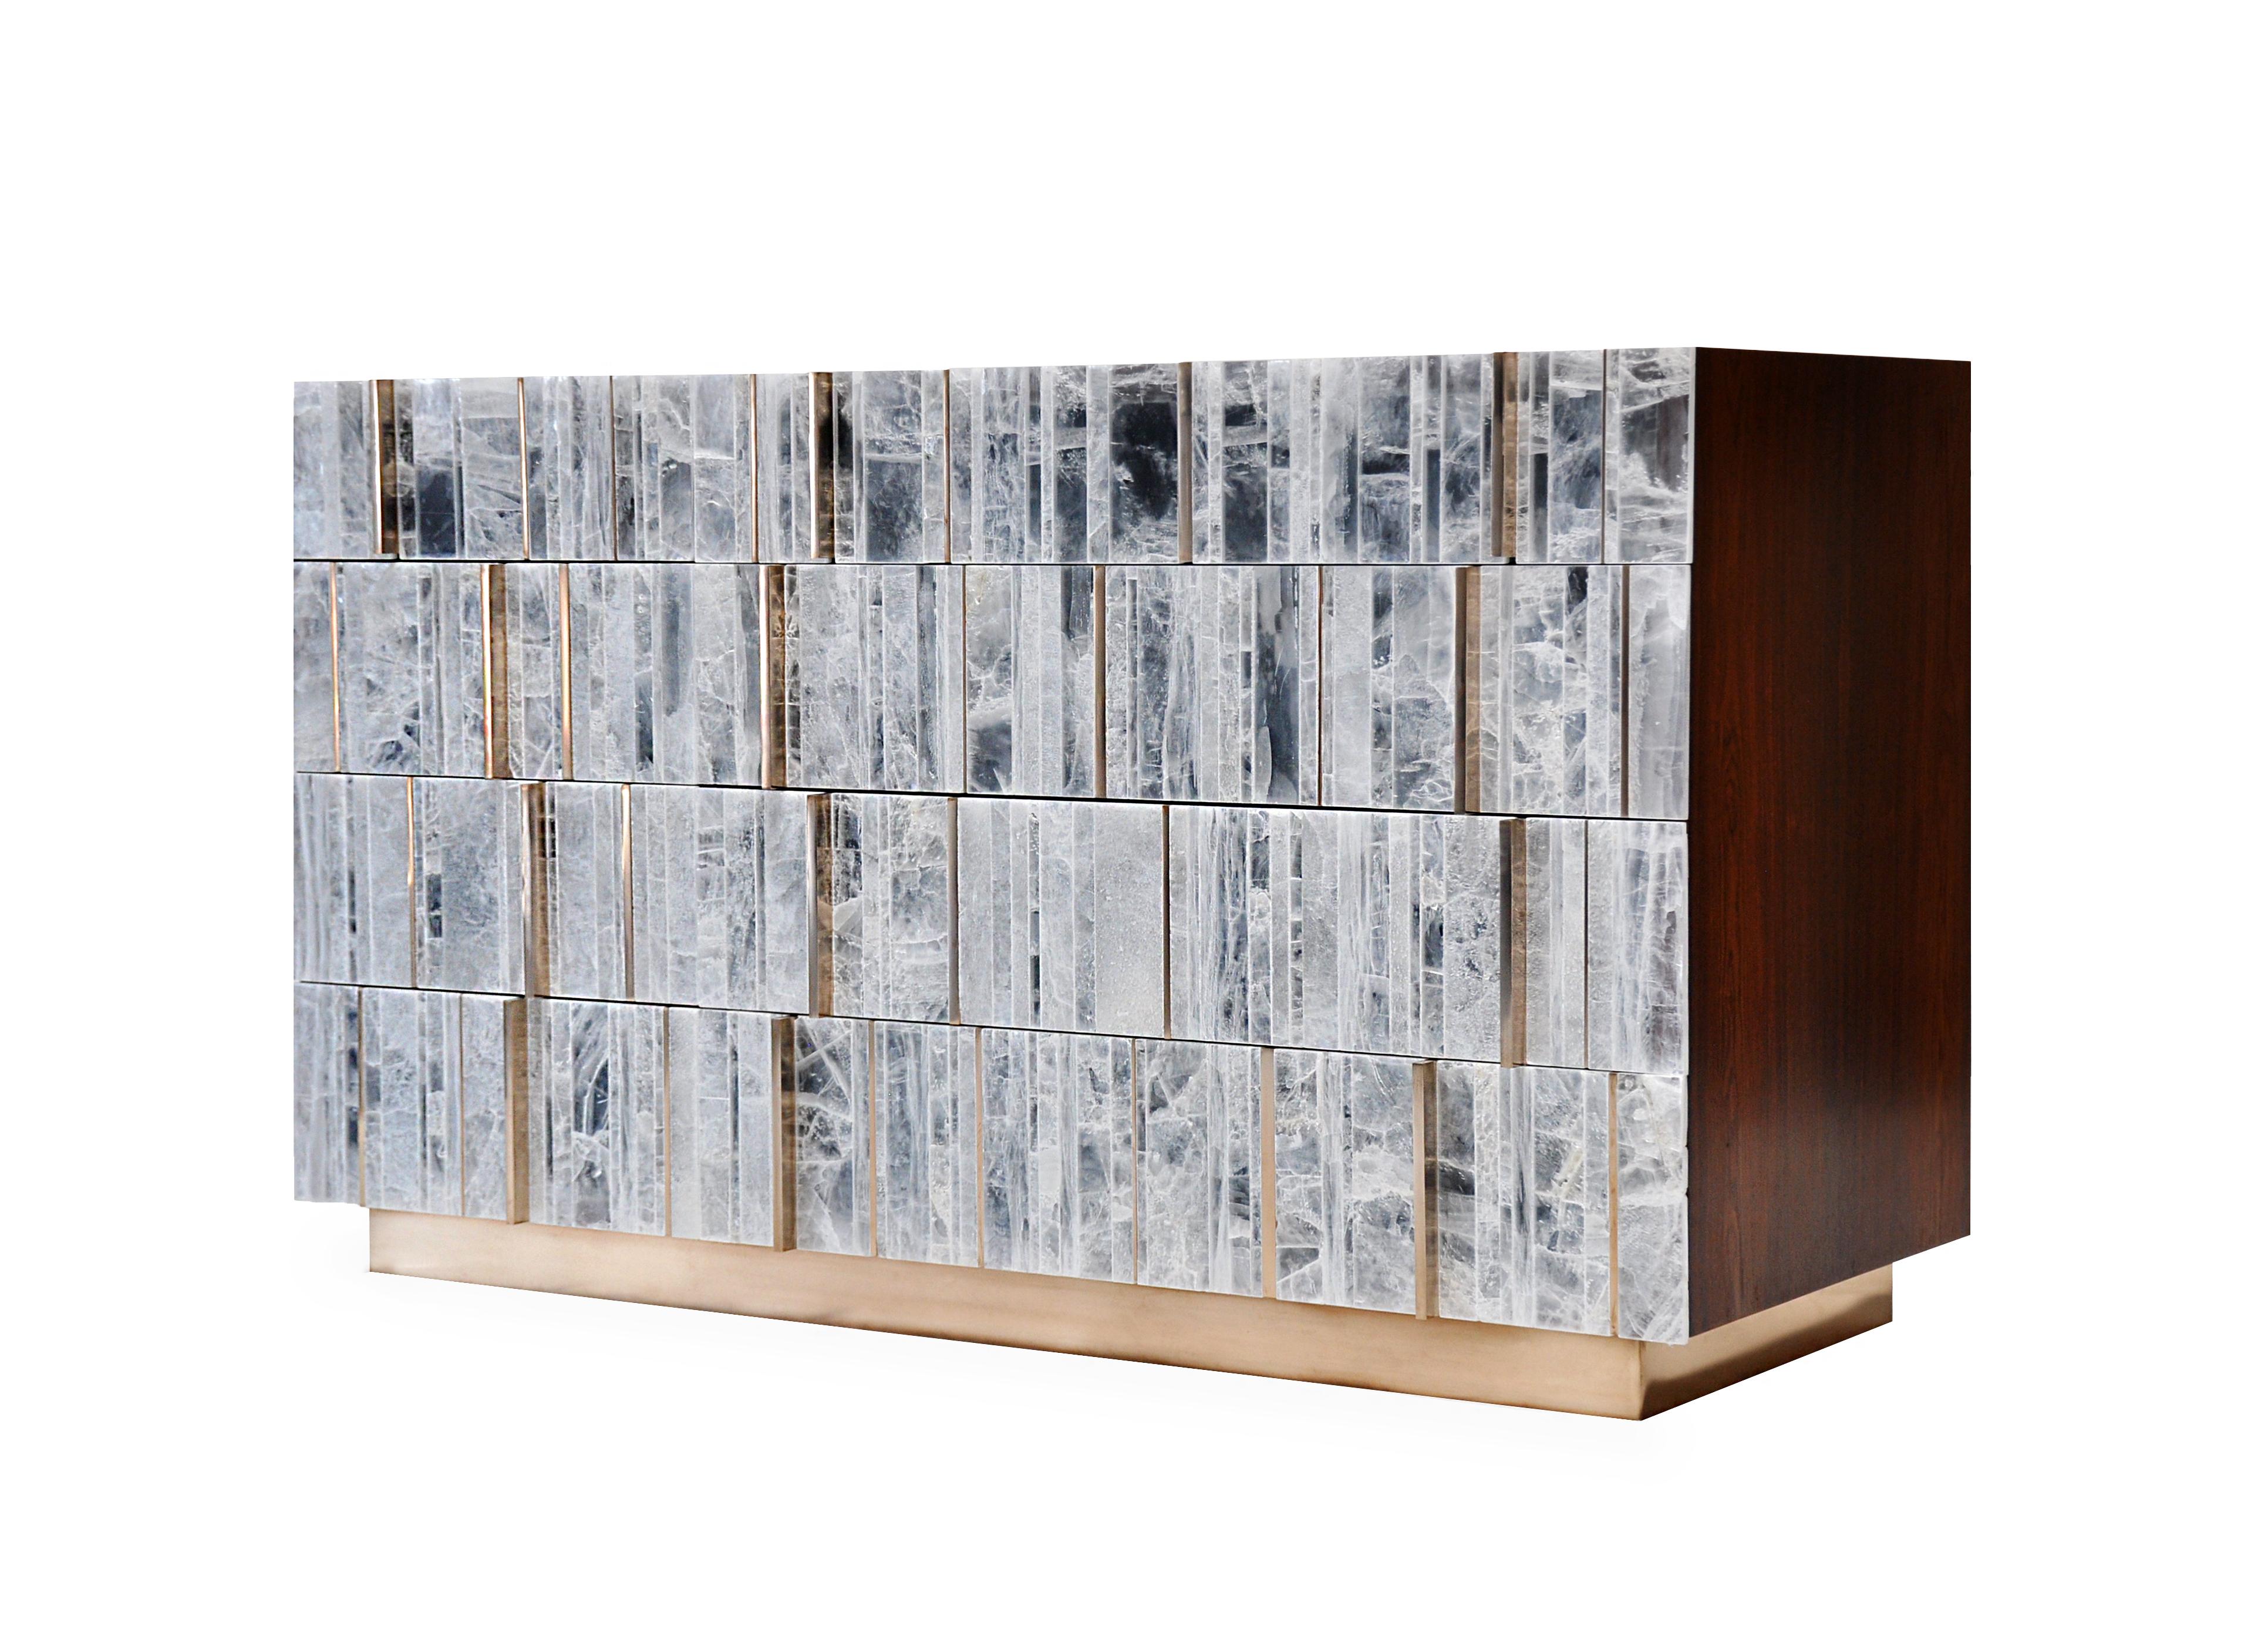 The Sonnet Dresser uses the rhythmic patterns of selenite, hand cut and arranged in vertical pattern along with polished metal inlay and handles to create a beautiful luxurious statement piece. Selenite is a naturally occurring crystalline form of